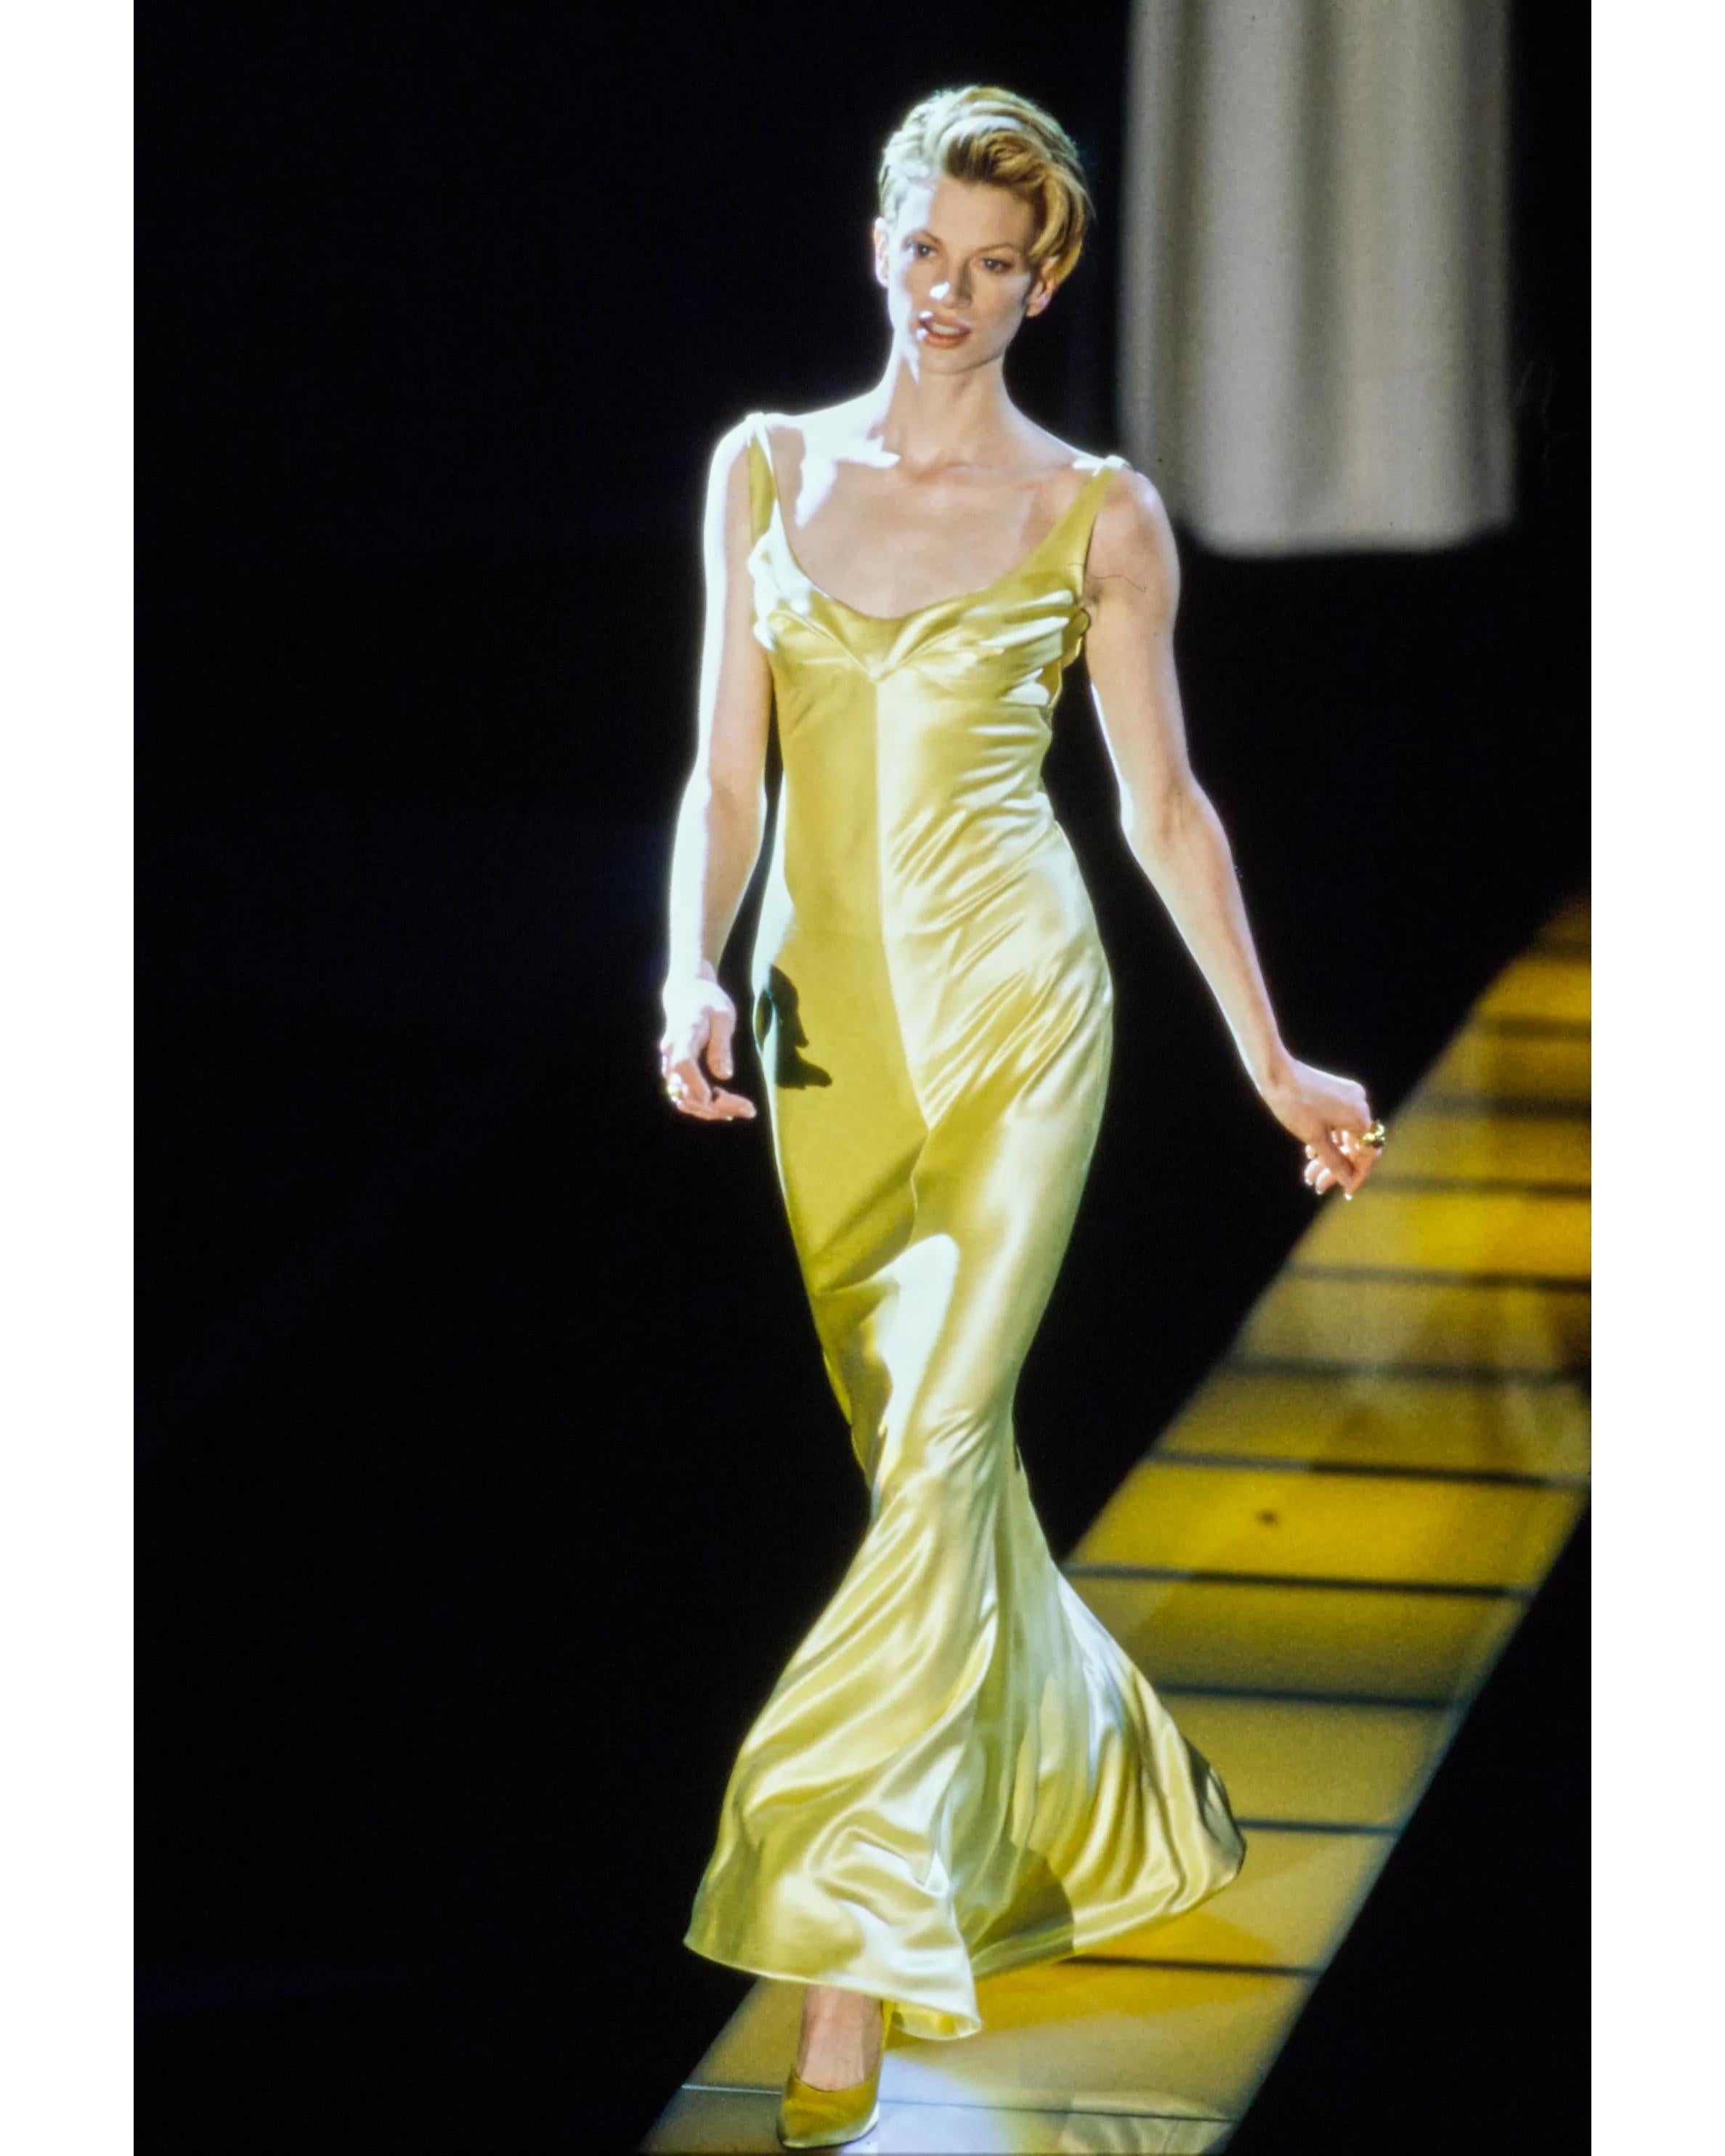 A/W 1995 Gianni Versace yellow silk satin gown with pleated twist bust, from the provenance of Gail Elliott. A one of one (only green colorway of this dress went into production). This piece was gifted to model Gail Elliott from Gianni Versace